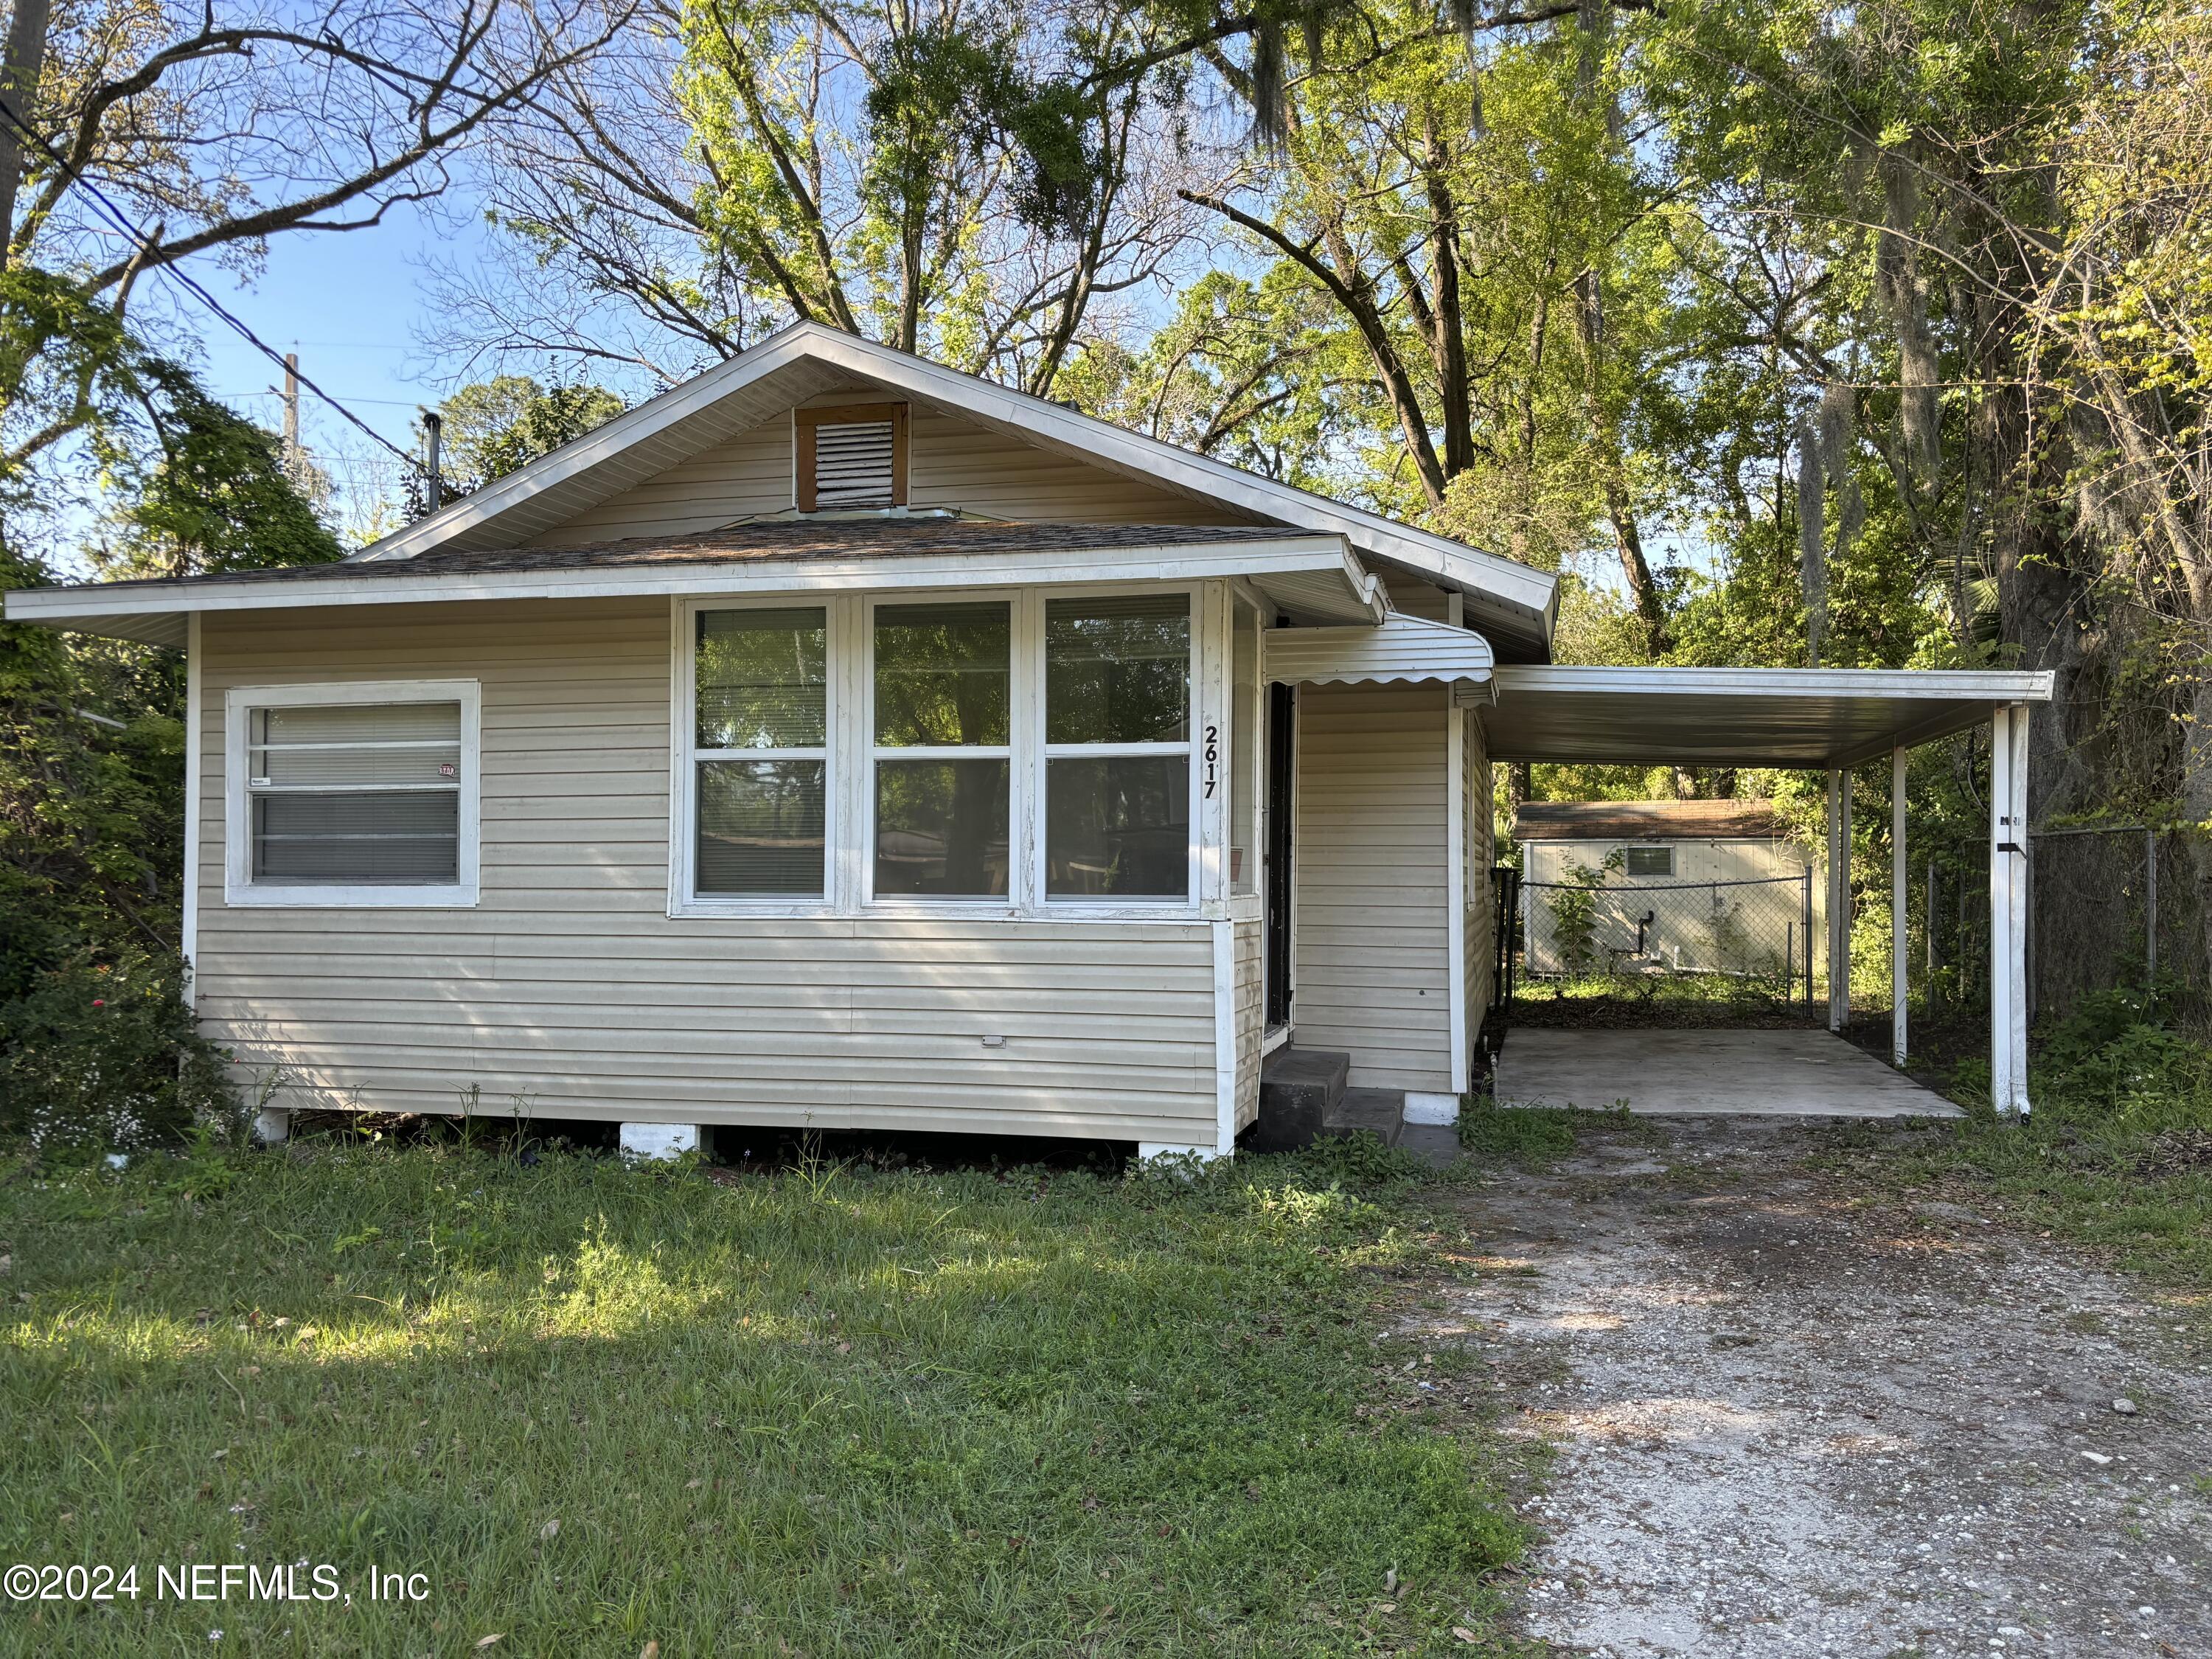 Jacksonville, FL home for sale located at 2617 W 30th Street, Jacksonville, FL 32209